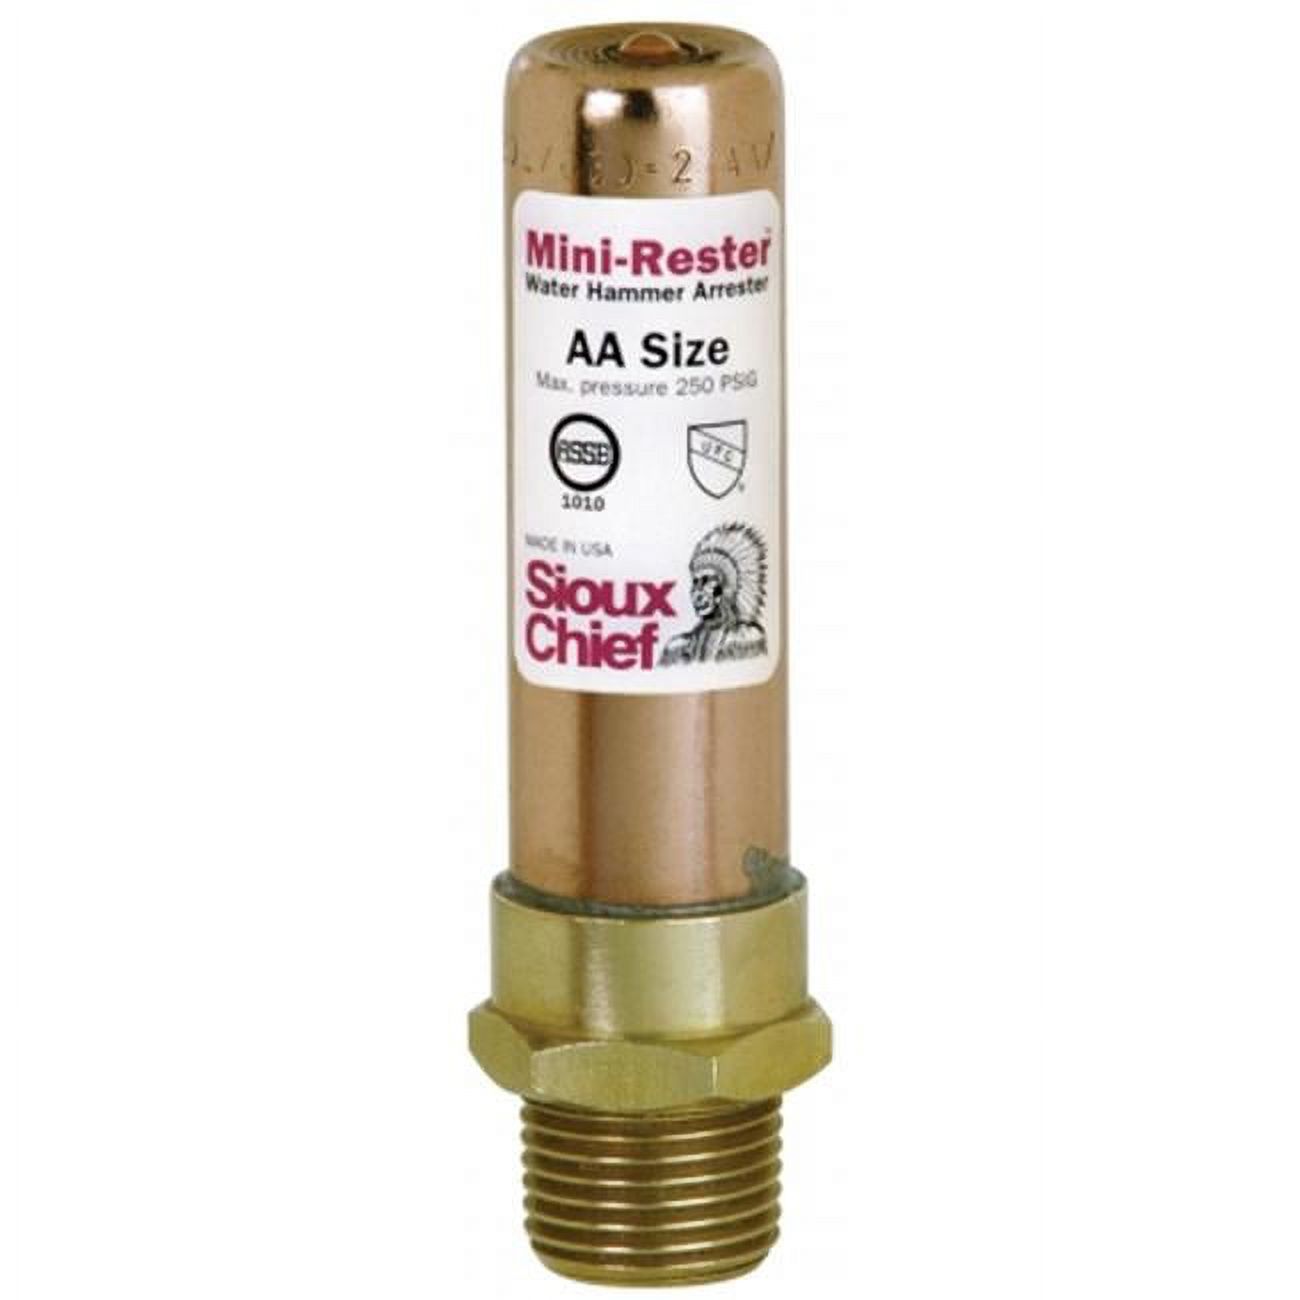 Sioux Chief MiniRester 1/2 in. MIP in. X 1/2 in. D Closed in. Copper Water Hammer Arrester 1 pk - image 1 of 1